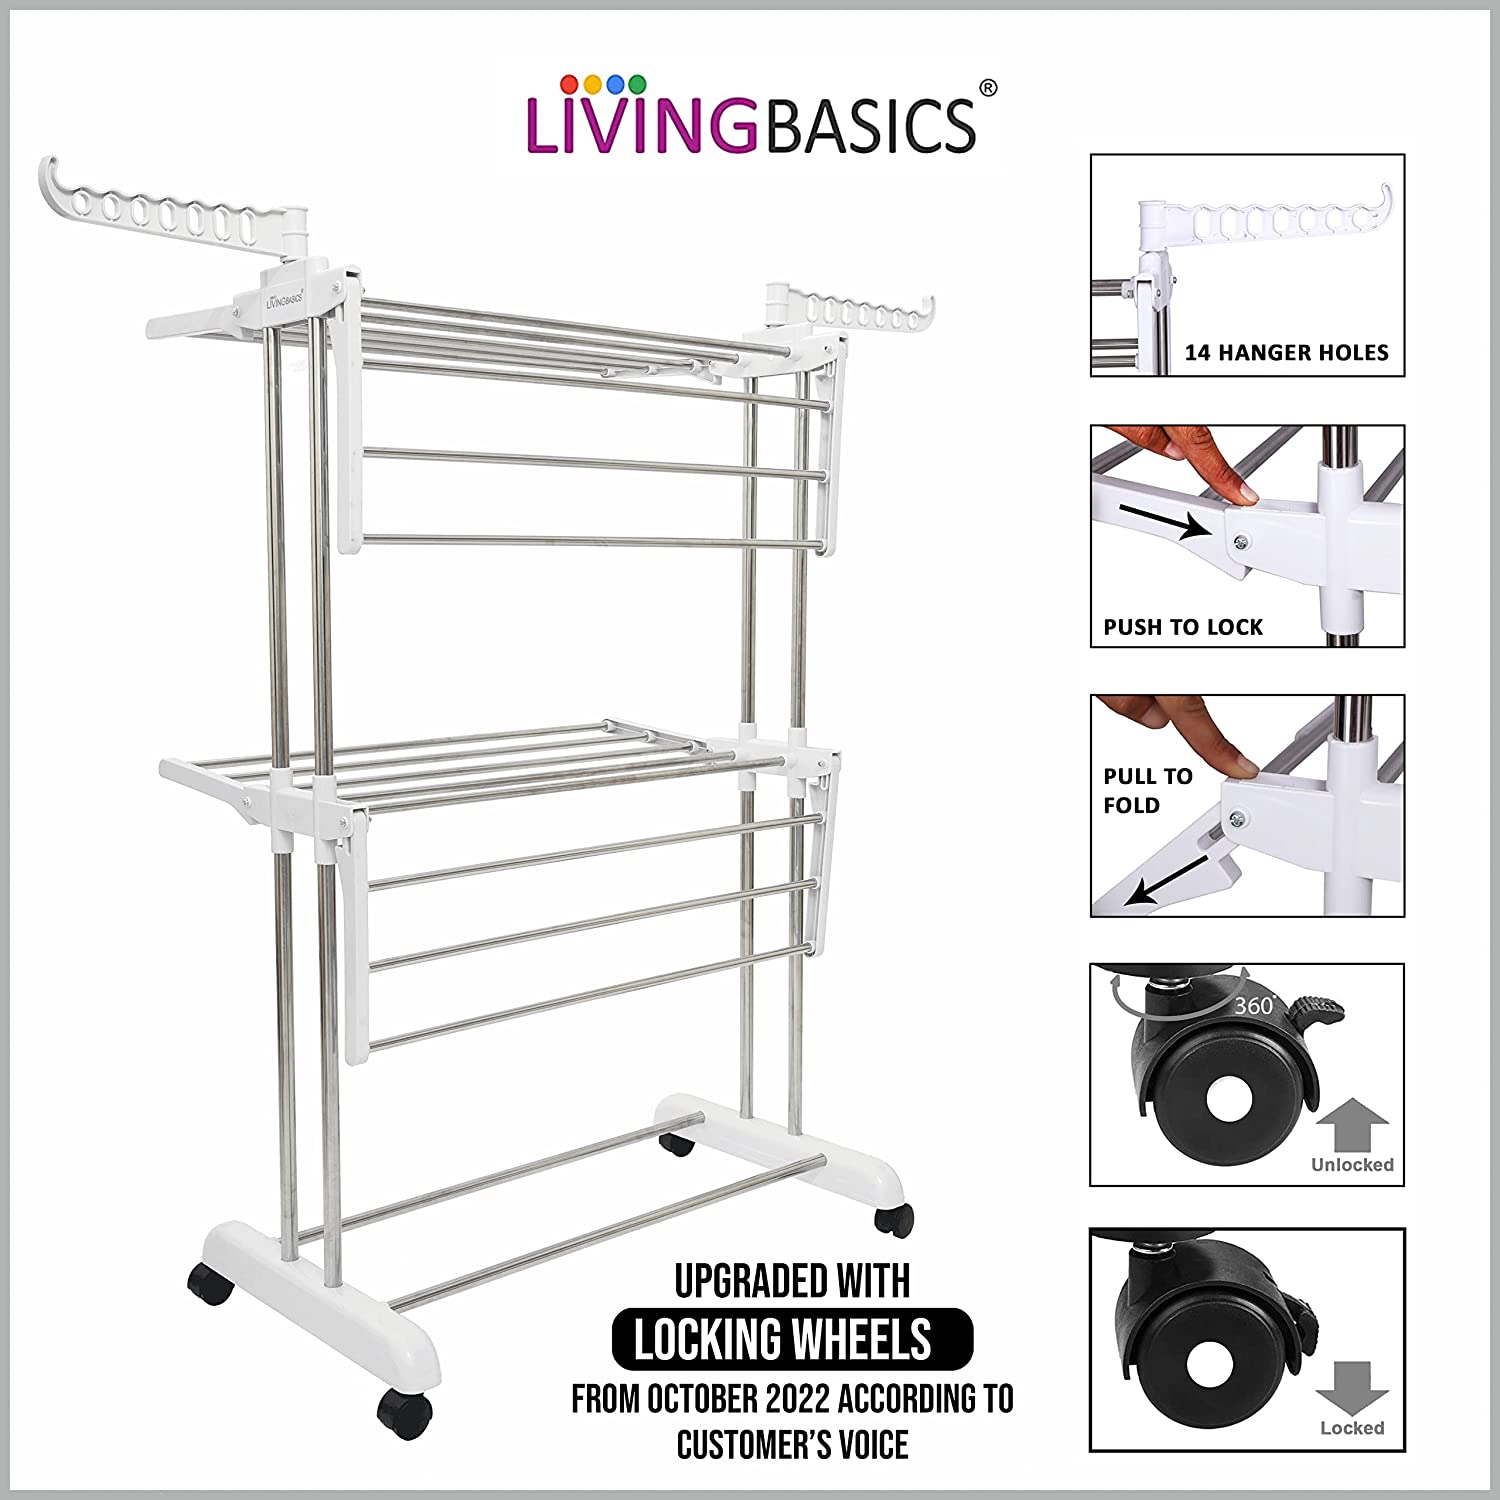 LIVINGBASICS Cloth Drying Stand Rust-Free Stainless Steel & ABS 2 Tier/Layer Foldable Clothes Dryer Rack/Folding Laundry Dry Stands with Wheels for Home/Indoor/Outdoor/Balcony (Snow White)